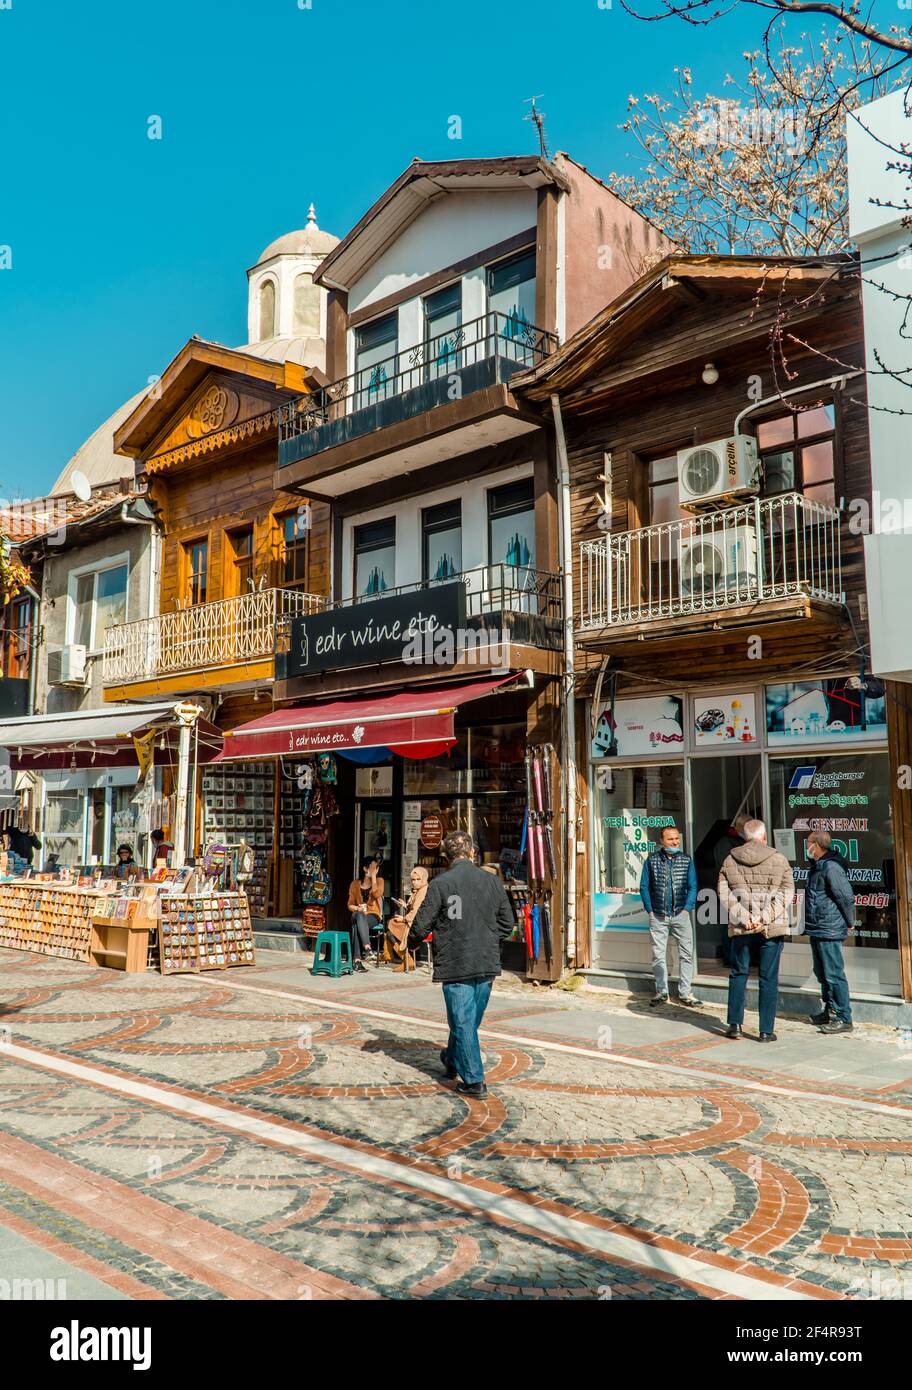 Edirne, Turkey - February 26, 2021 - street photography of people walking and traditional wooden houses with shops in downtown Edirne, Western Turkey. Stock Photo